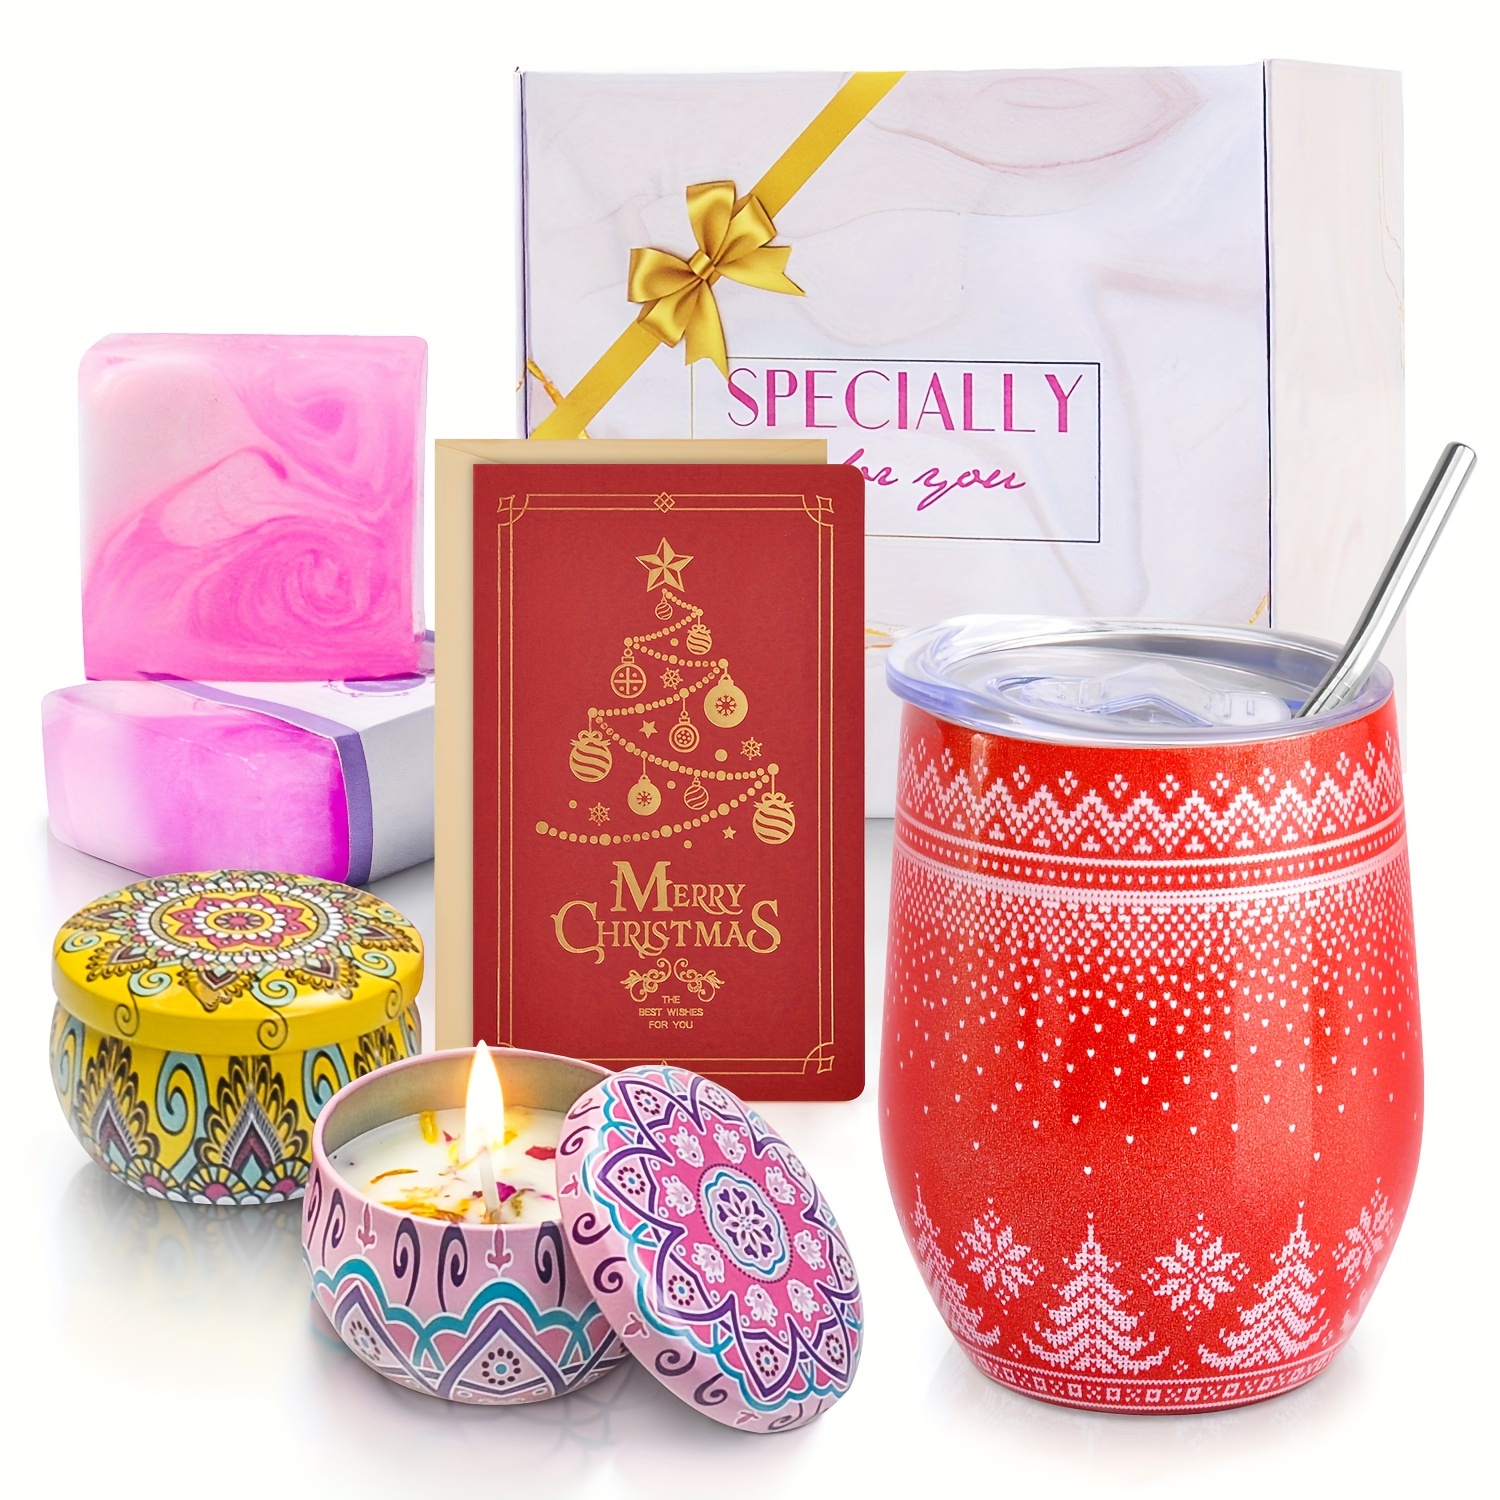 Christmas Gifts Box,Christmas Gifts Basket for Women Men,Merry Christmas  Gifts,Thank You Gifts Relaxing Spa Bath Gifts Scented Candles Insulated